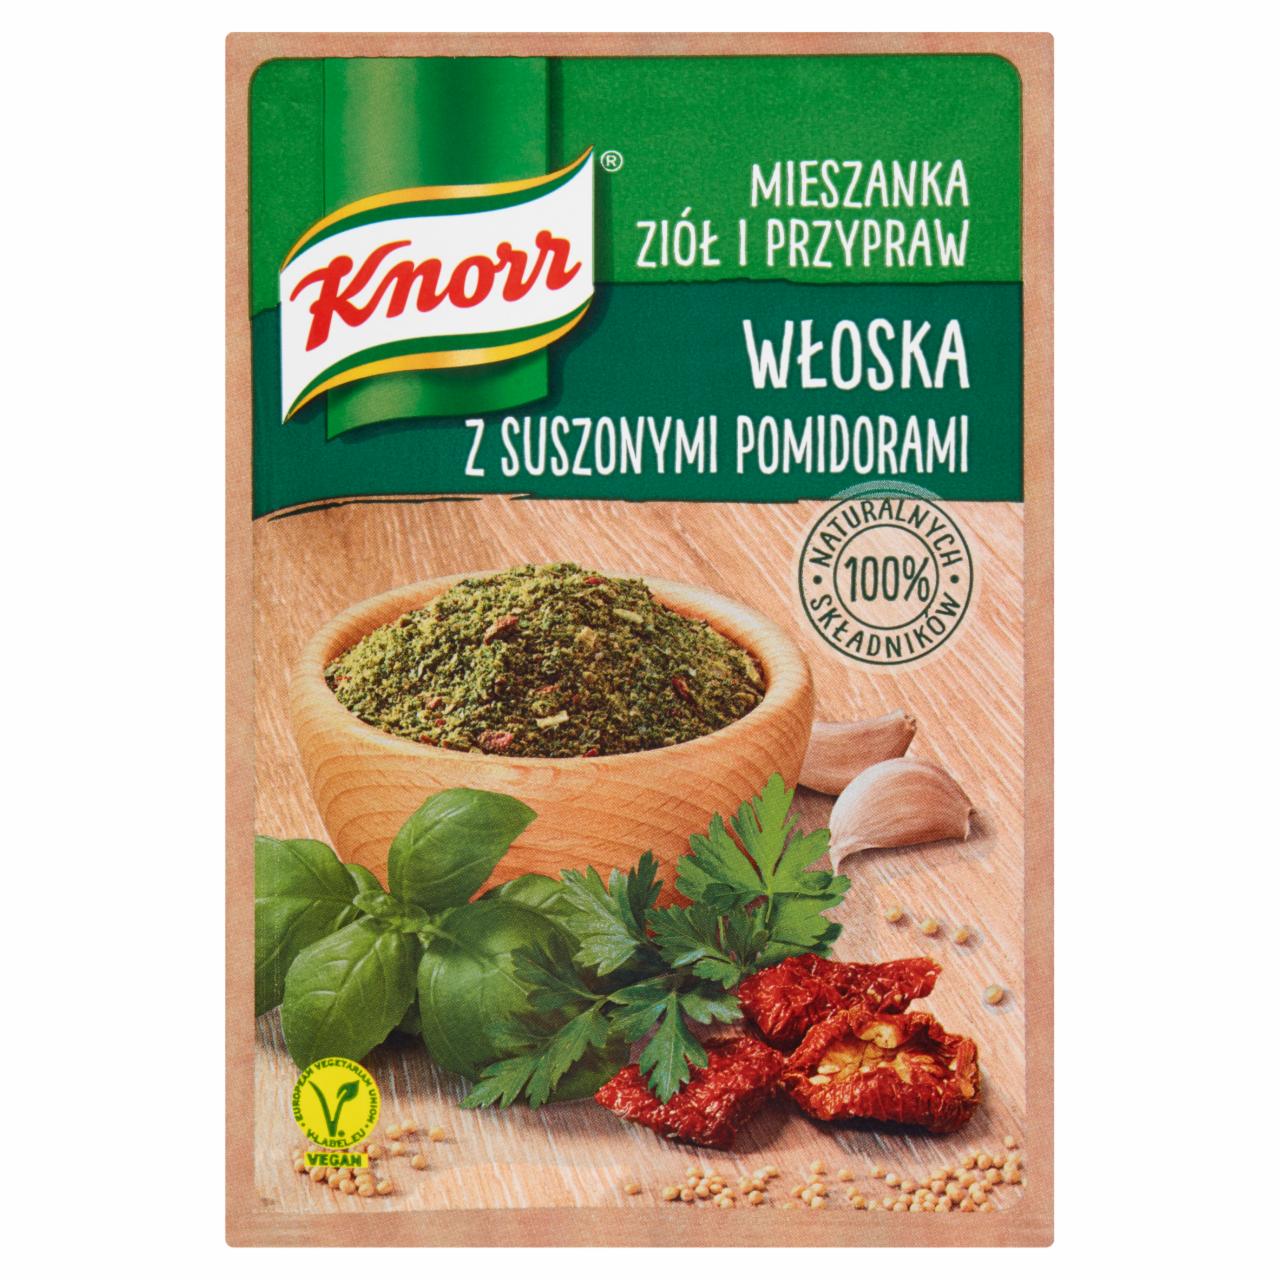 Photo - Knorr Italian with Dried Tomatoes Herbs and Spices Mix 13.5 g